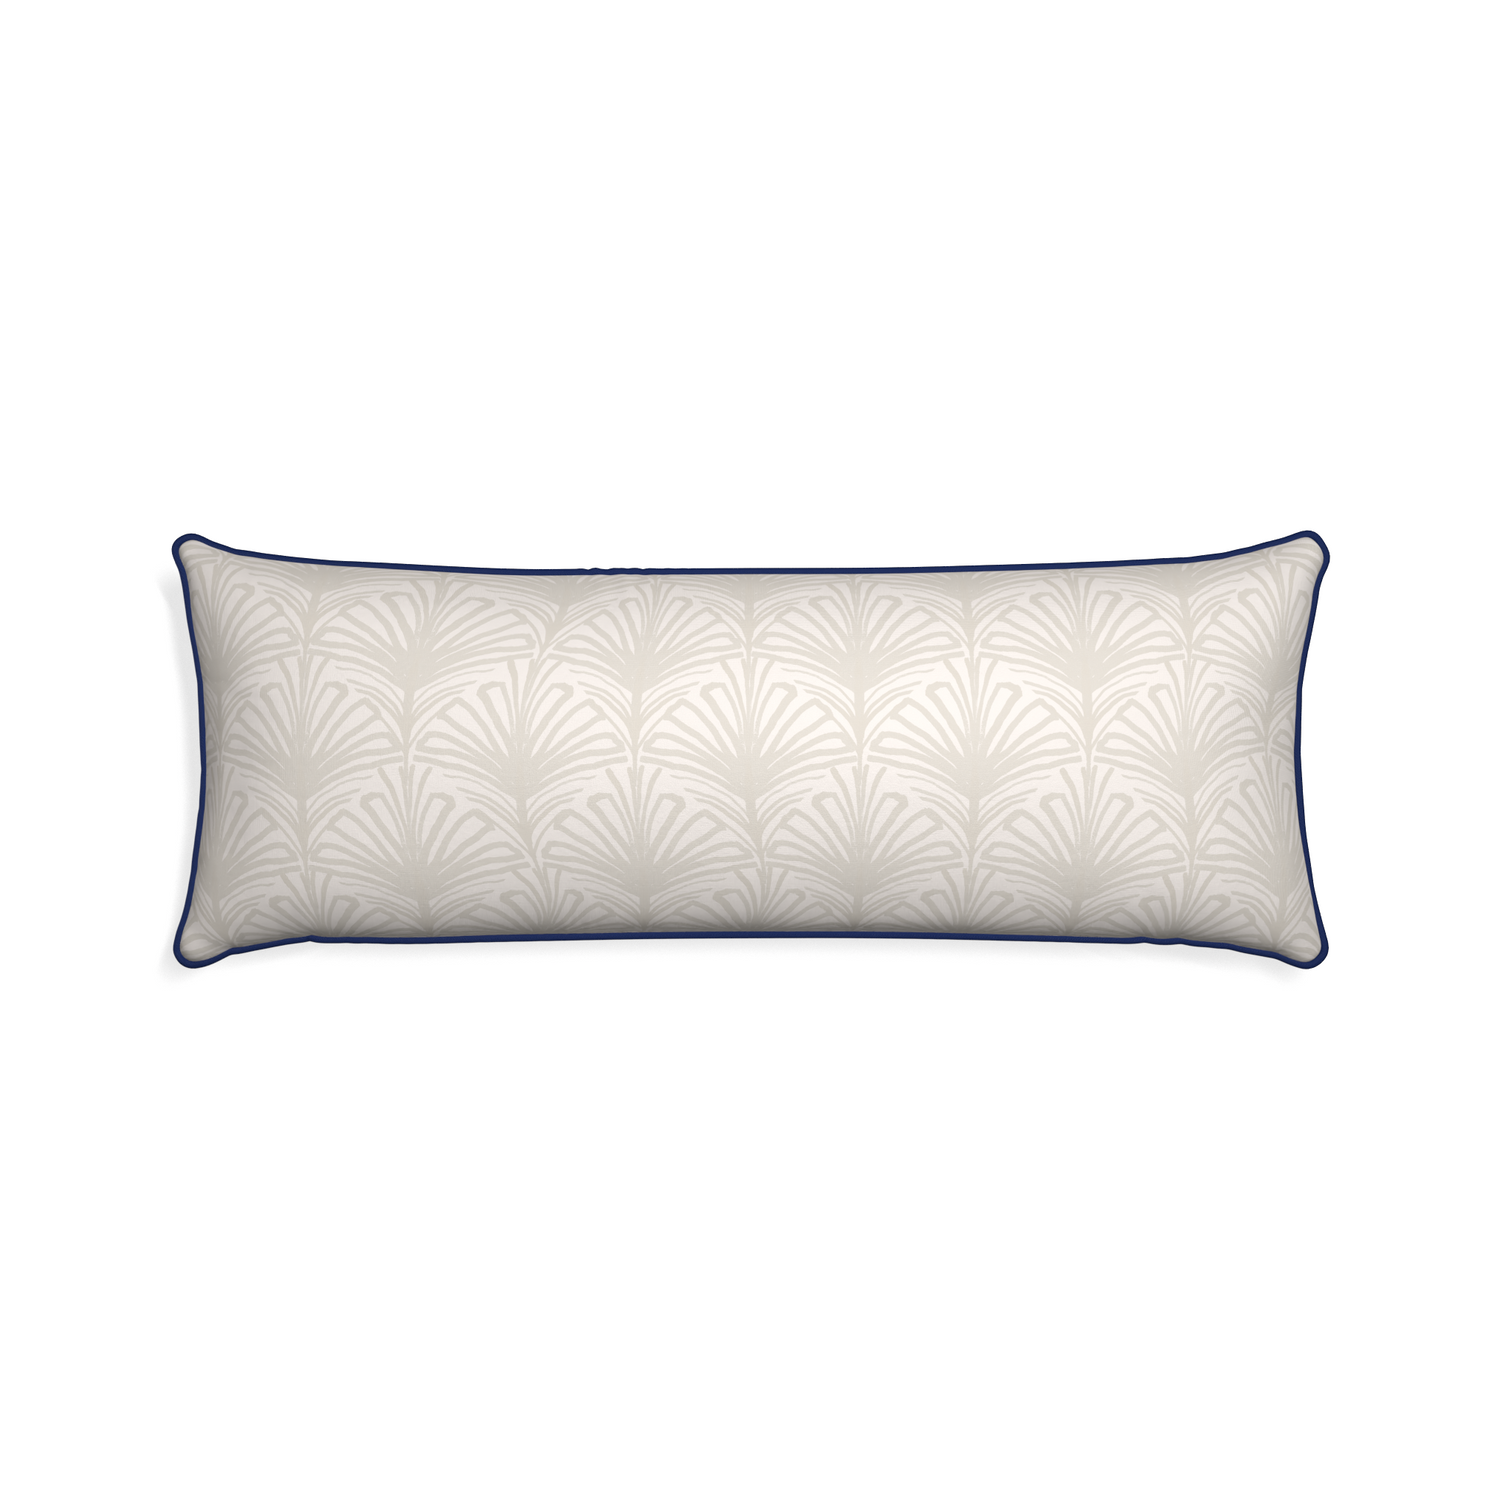 Xl-lumbar suzy sand custom pillow with midnight piping on white background